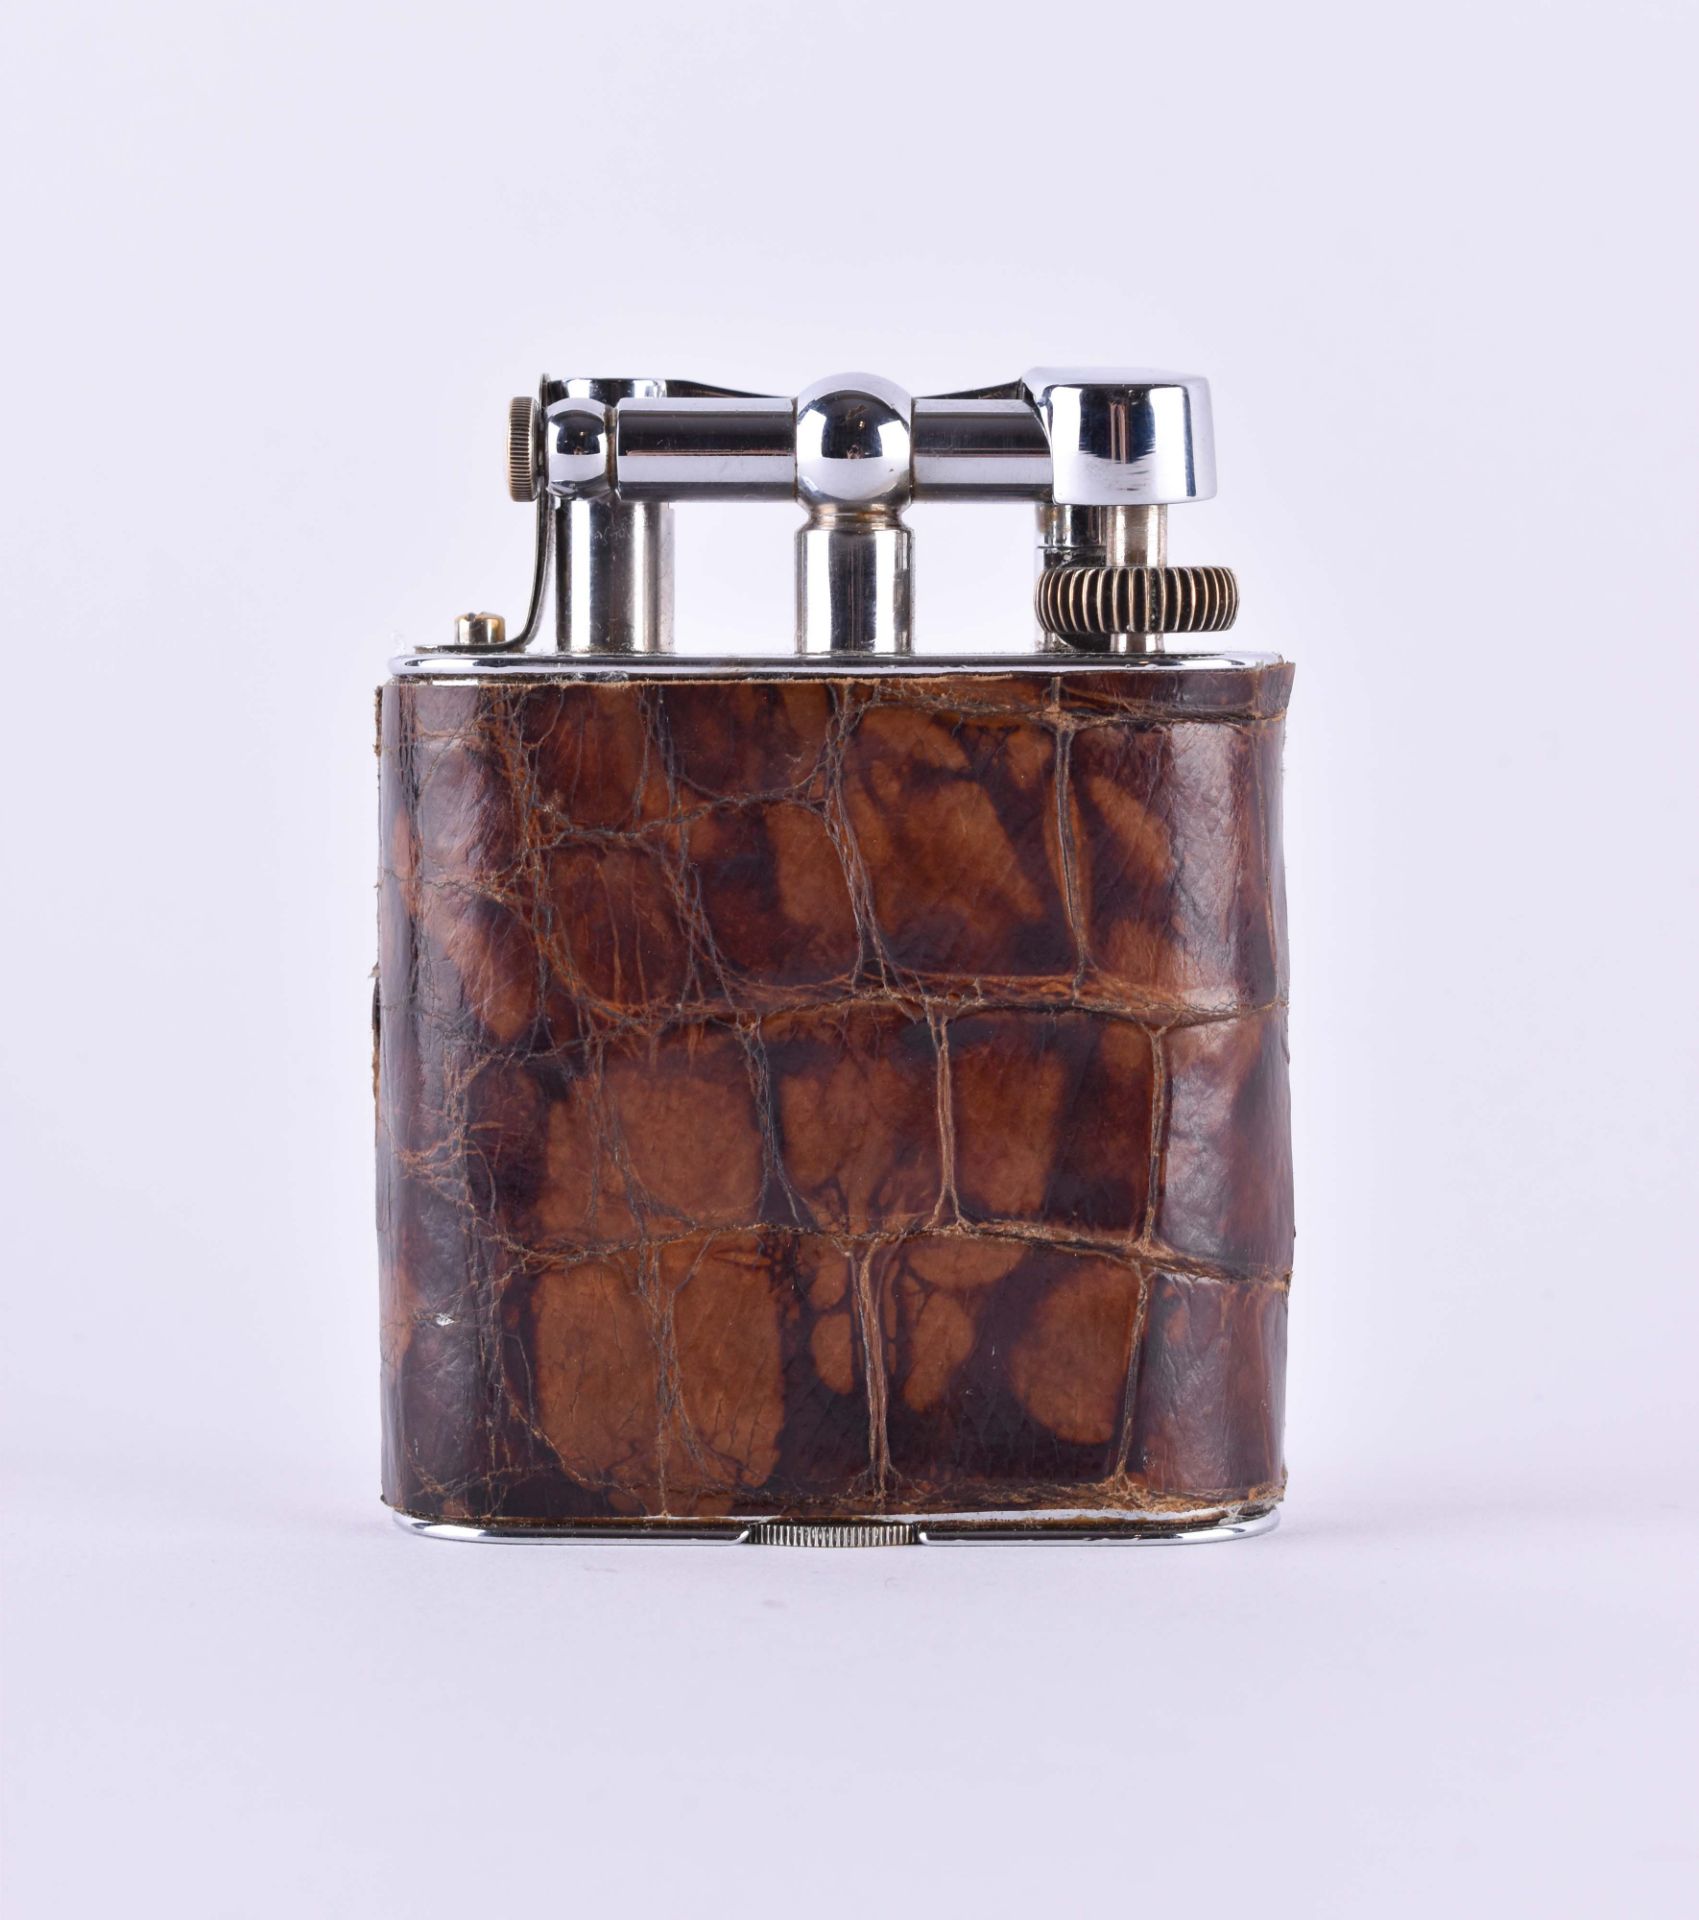 Dunhill Giant table lighter, around 1940 - Image 2 of 4